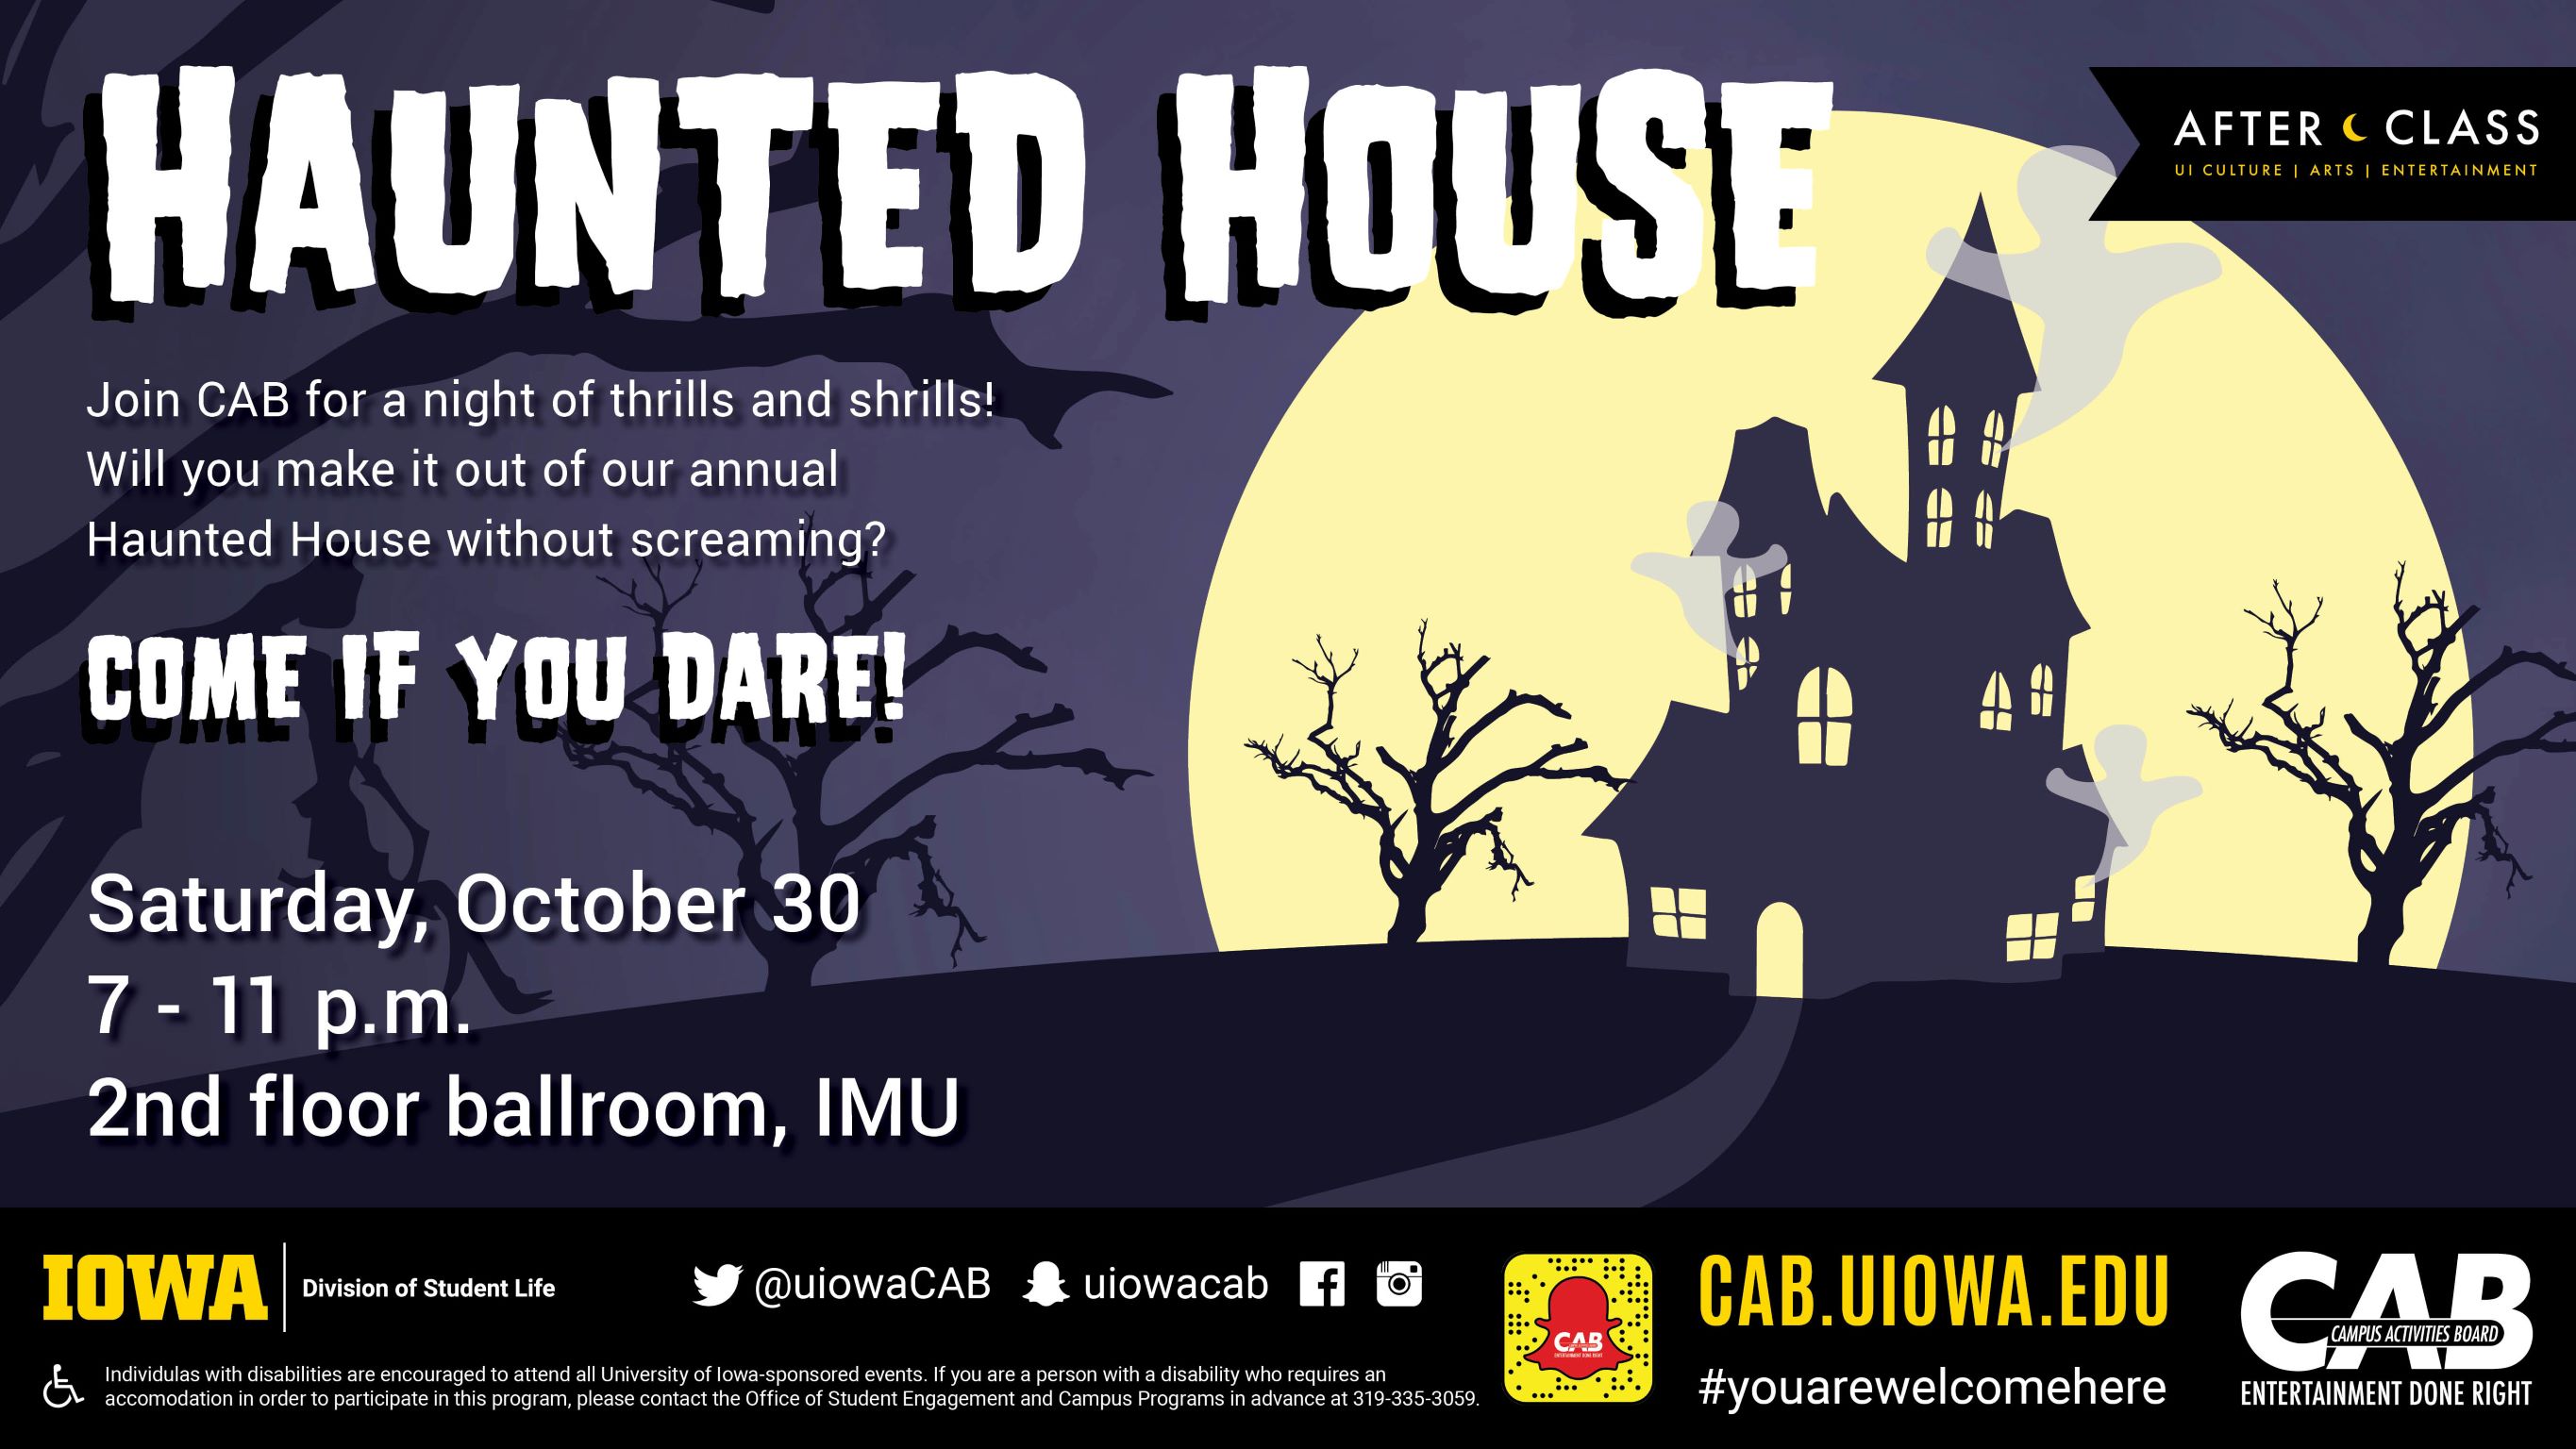 Haunted House Come if You Dare! Saturday October 30, 7-11 PM 2nd Floor Ballroom, IMU